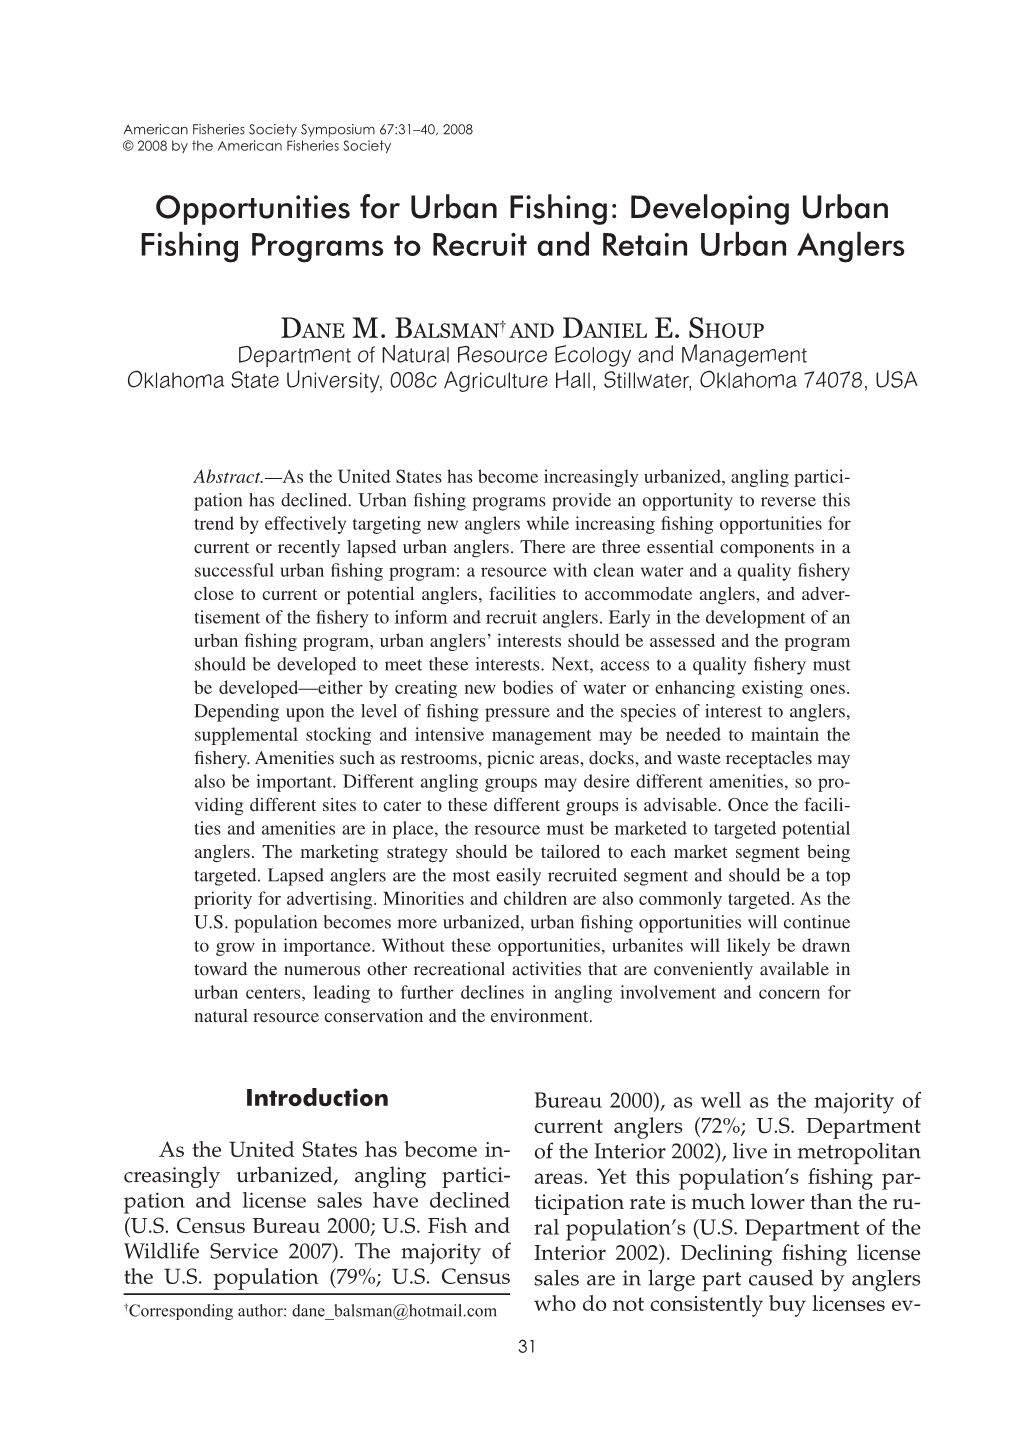 Opportunities for Urban Fishing: Developing Urban Fishing Programs to Recruit and Retain Urban Anglers